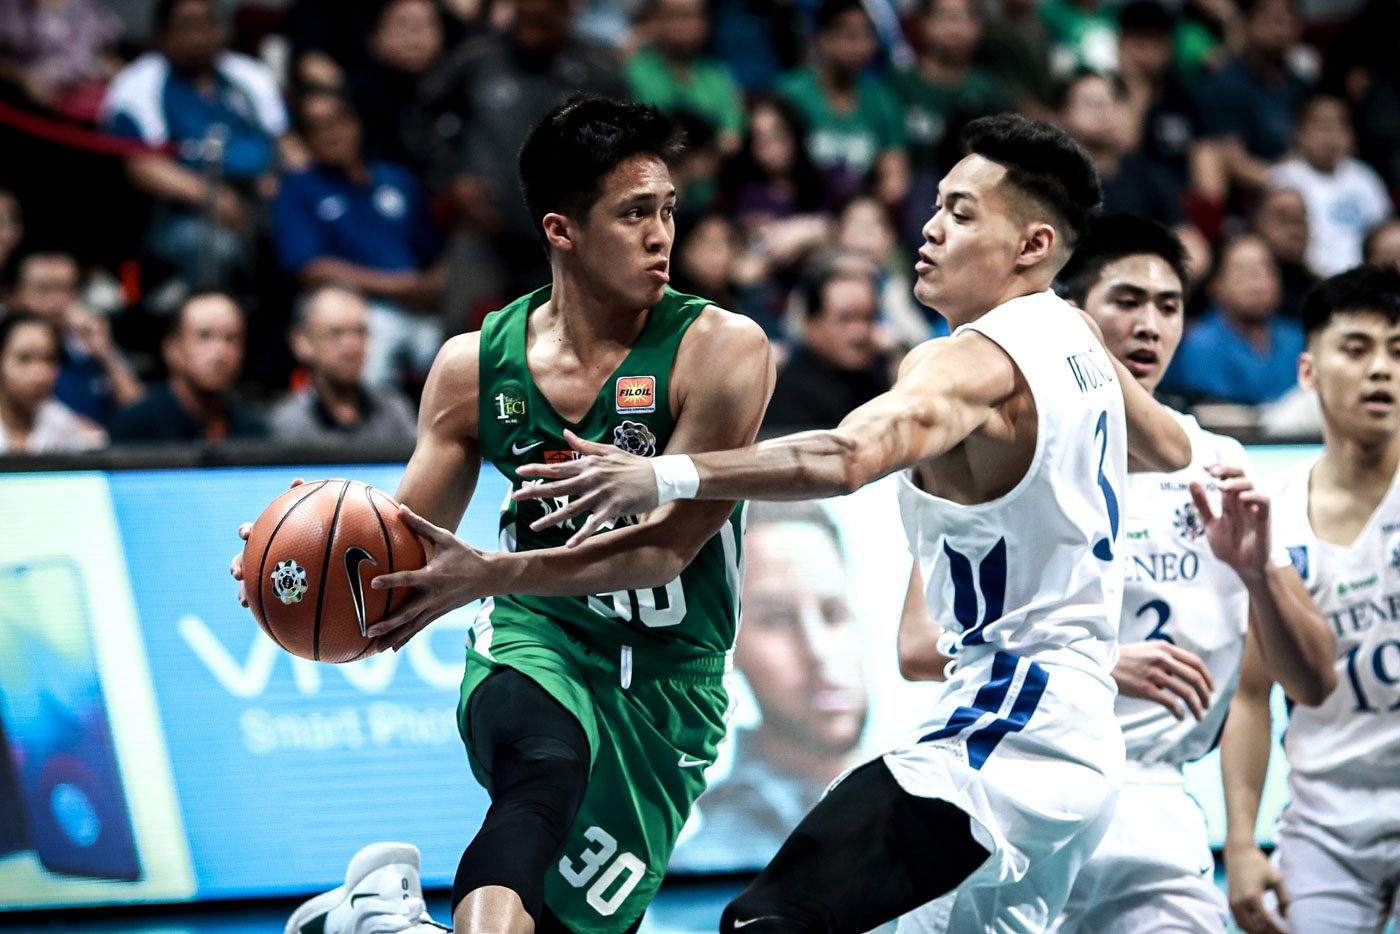 4 big questions for this weekend’s UAAP games